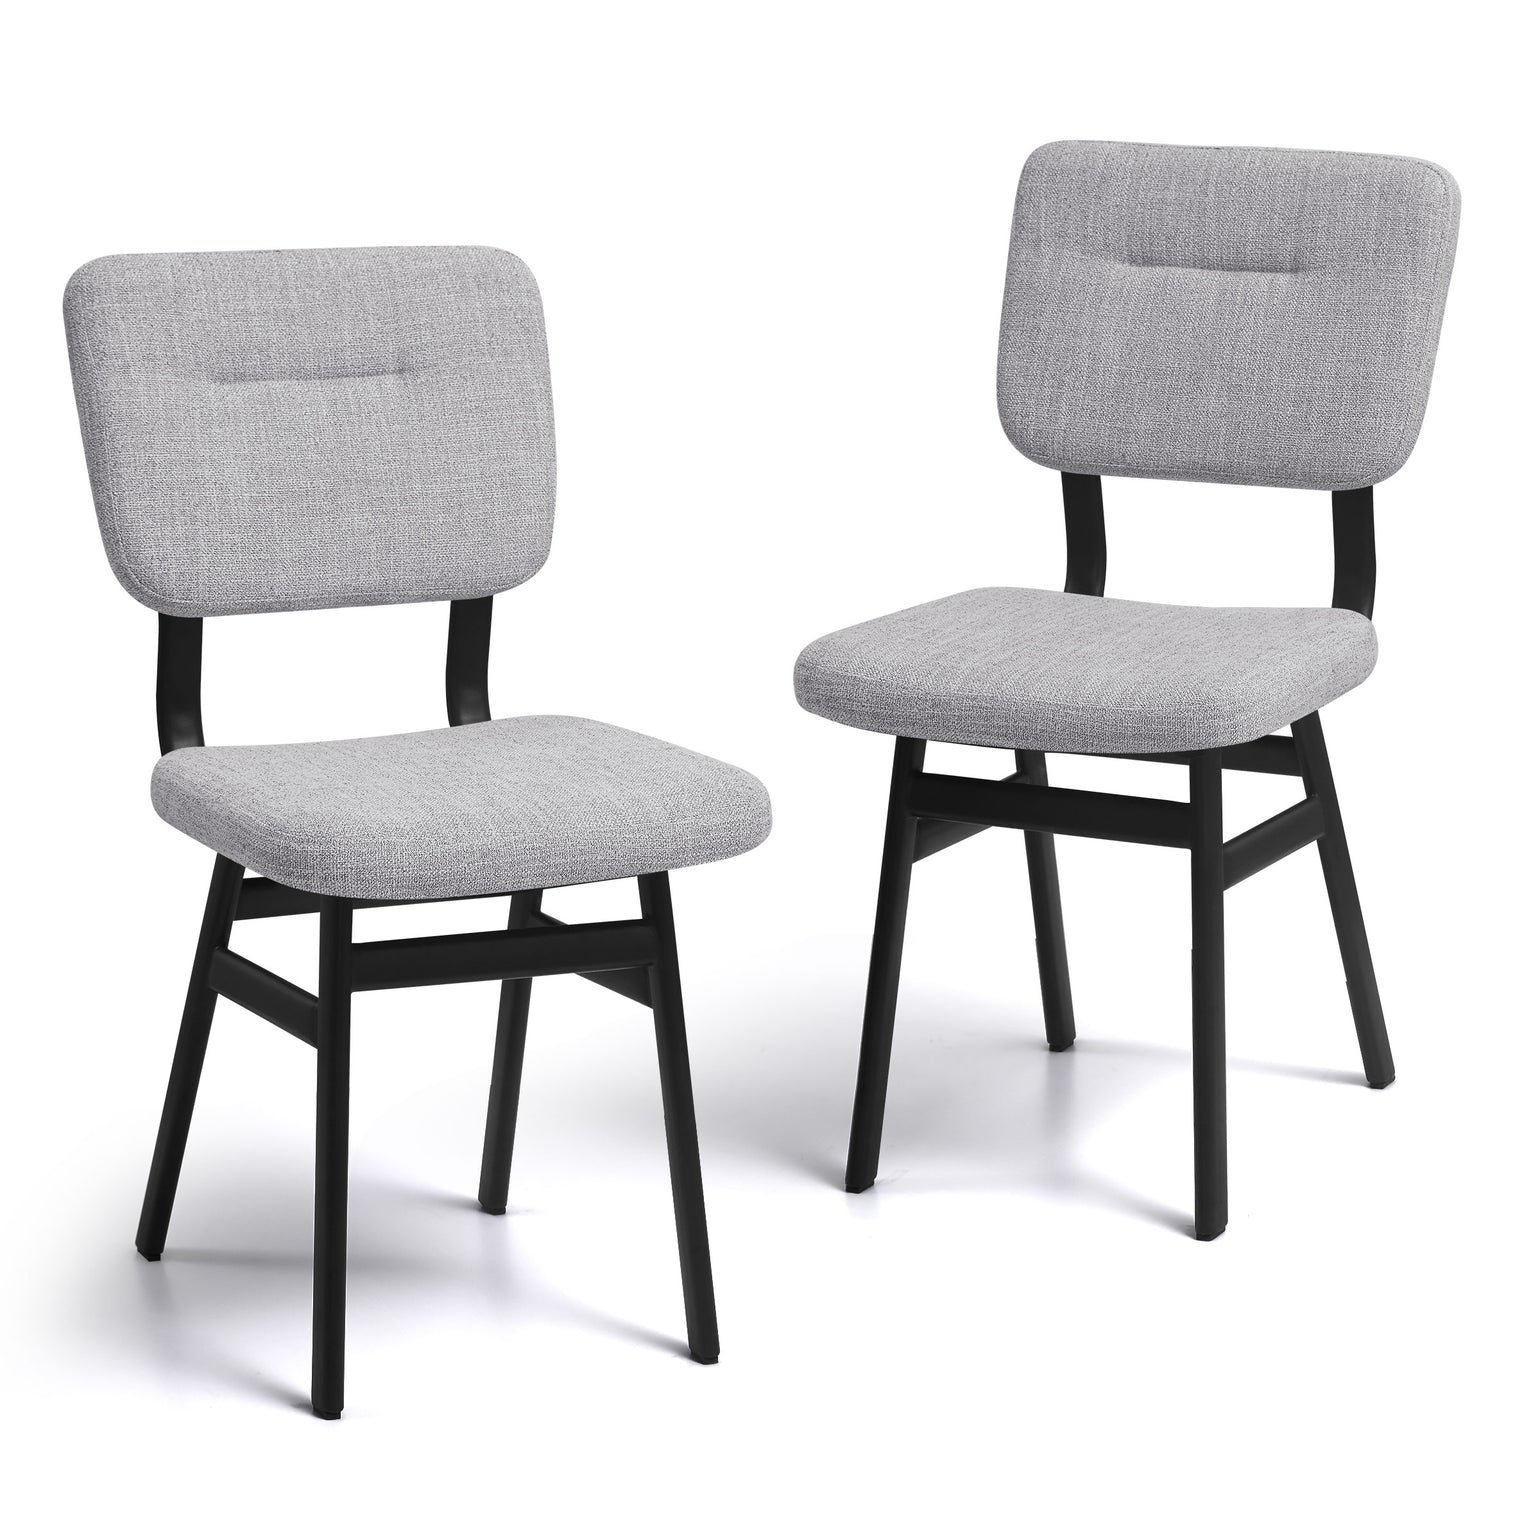 Sofid Fabric Metal Upholstered Back Side Chair (Set of 2)